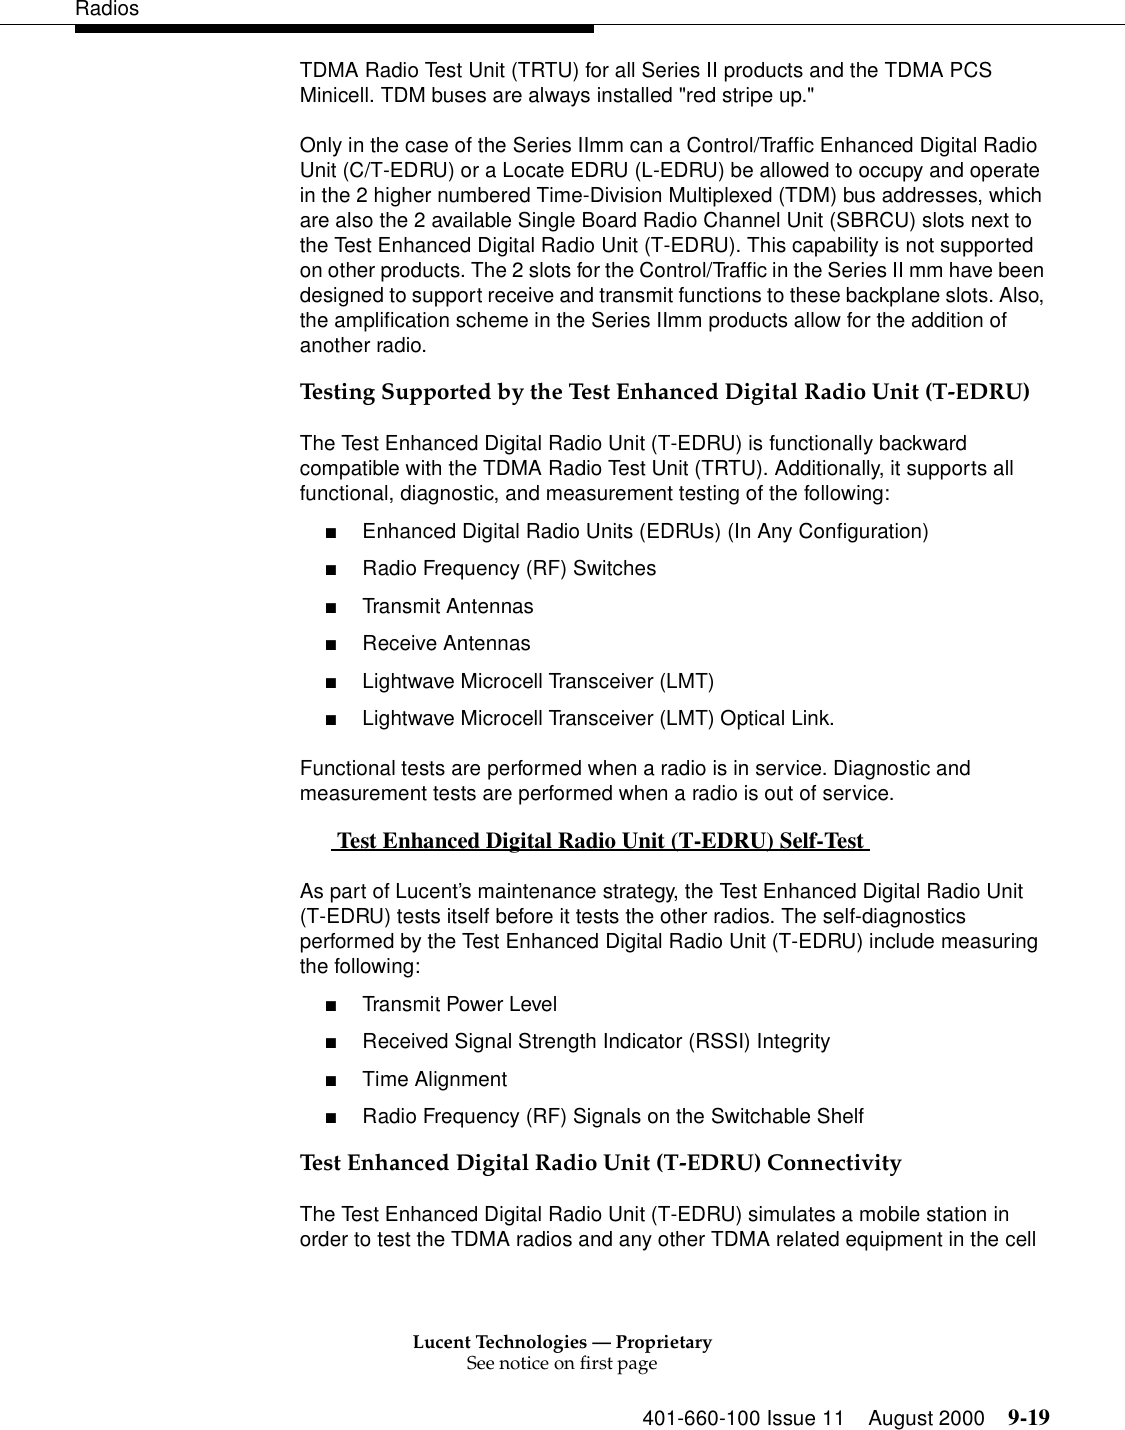 Lucent Technologies — ProprietarySee notice on first page401-660-100 Issue 11 August 2000 9-19RadiosTDMA Radio Test Unit (TRTU) for all Series II products and the TDMA PCS Minicell. TDM buses are always installed &quot;red stripe up.&quot;Only in the case of the Series IImm can a Control/Traffic Enhanced Digital Radio Unit (C/T-EDRU) or a Locate EDRU (L-EDRU) be allowed to occupy and operate in the 2 higher numbered Time-Division Multiplexed (TDM) bus addresses, which are also the 2 available Single Board Radio Channel Unit (SBRCU) slots next to the Test Enhanced Digital Radio Unit (T-EDRU). This capability is not supported on other products. The 2 slots for the Control/Traffic in the Series II mm have been designed to support receive and transmit functions to these backplane slots. Also, the amplification scheme in the Series IImm products allow for the addition of another radio. Testing Supported by the Test Enhanced Digital Radio Unit (T-EDRU)The Test Enhanced Digital Radio Unit (T-EDRU) is functionally backward compatible with the TDMA Radio Test Unit (TRTU). Additionally, it supports all functional, diagnostic, and measurement testing of the following: ■Enhanced Digital Radio Units (EDRUs) (In Any Configuration) ■Radio Frequency (RF) Switches ■Transmit Antennas ■Receive Antennas ■Lightwave Microcell Transceiver (LMT) ■Lightwave Microcell Transceiver (LMT) Optical Link. Functional tests are performed when a radio is in service. Diagnostic and measurement tests are performed when a radio is out of service.  Test Enhanced Digital Radio Unit (T-EDRU) Self-Test  0As part of Lucent’s maintenance strategy, the Test Enhanced Digital Radio Unit (T-EDRU) tests itself before it tests the other radios. The self-diagnostics performed by the Test Enhanced Digital Radio Unit (T-EDRU) include measuring the following: ■Transmit Power Level ■Received Signal Strength Indicator (RSSI) Integrity ■Time Alignment ■Radio Frequency (RF) Signals on the Switchable Shelf Test Enhanced Digital Radio Unit (T-EDRU) ConnectivityThe Test Enhanced Digital Radio Unit (T-EDRU) simulates a mobile station in order to test the TDMA radios and any other TDMA related equipment in the cell 